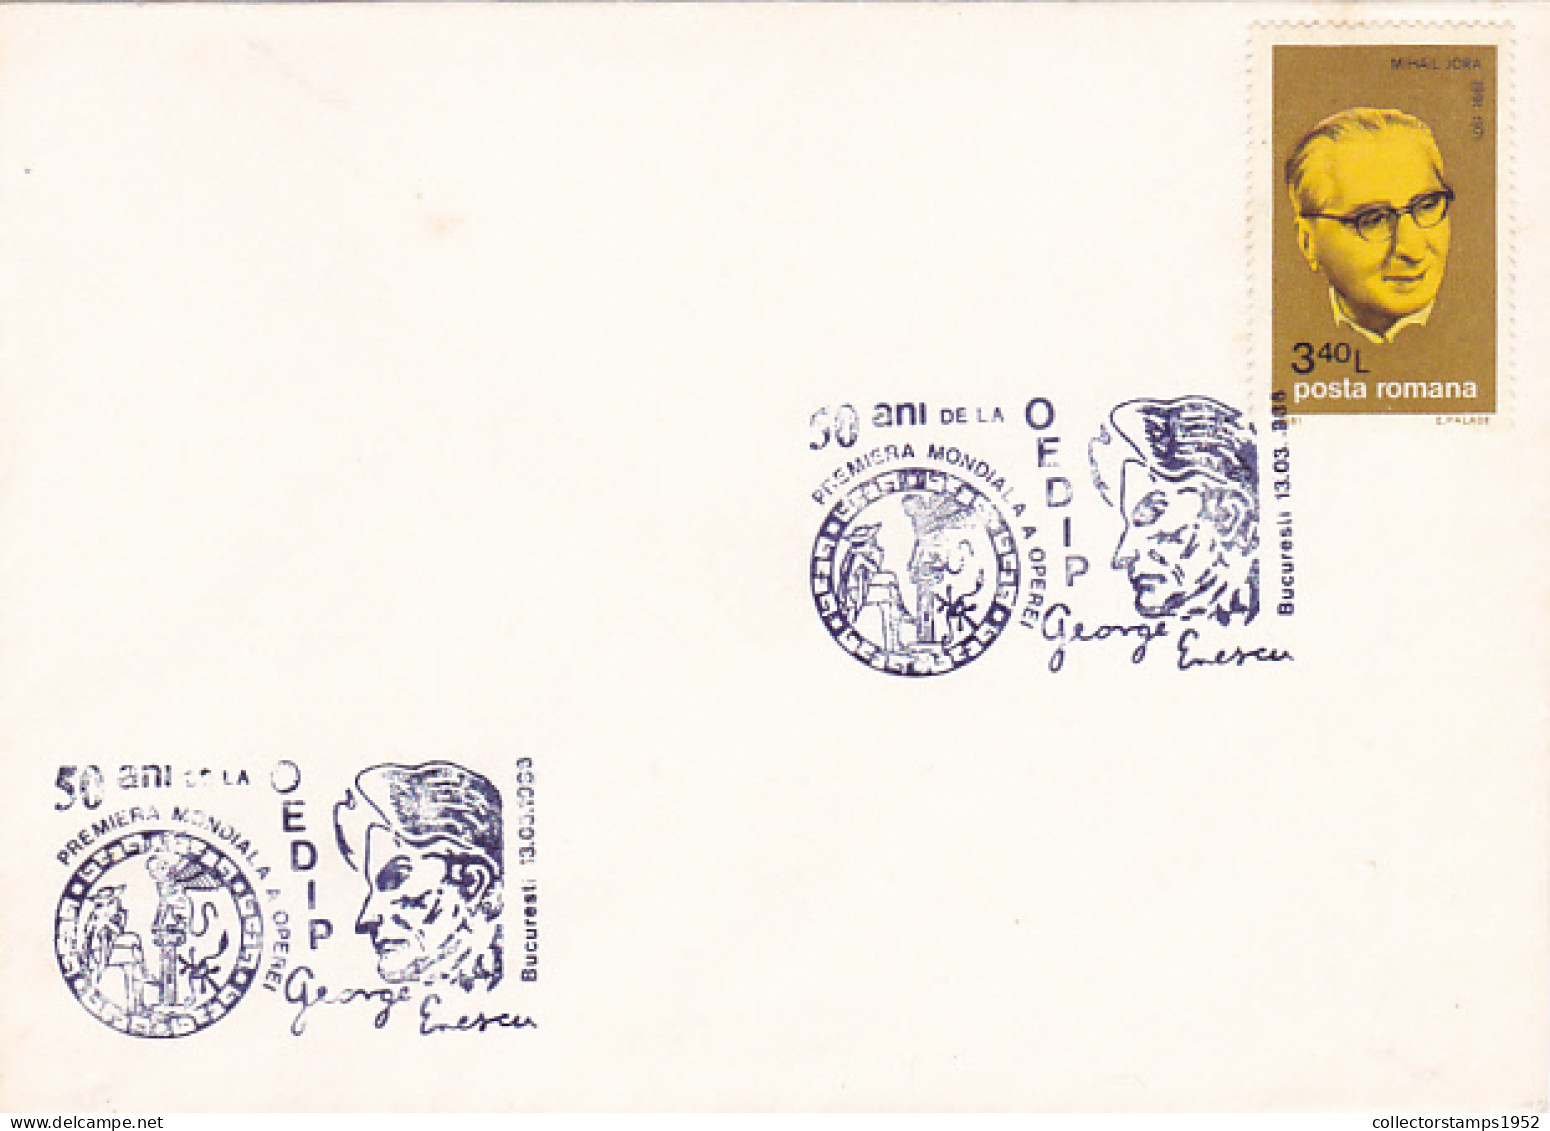 GEORGE ENESCU, COMPOSER, OEDIP OPERA, MUSIC, SPECIAL POSTMARKS ON COVER, 1986, ROMANIA - Musique